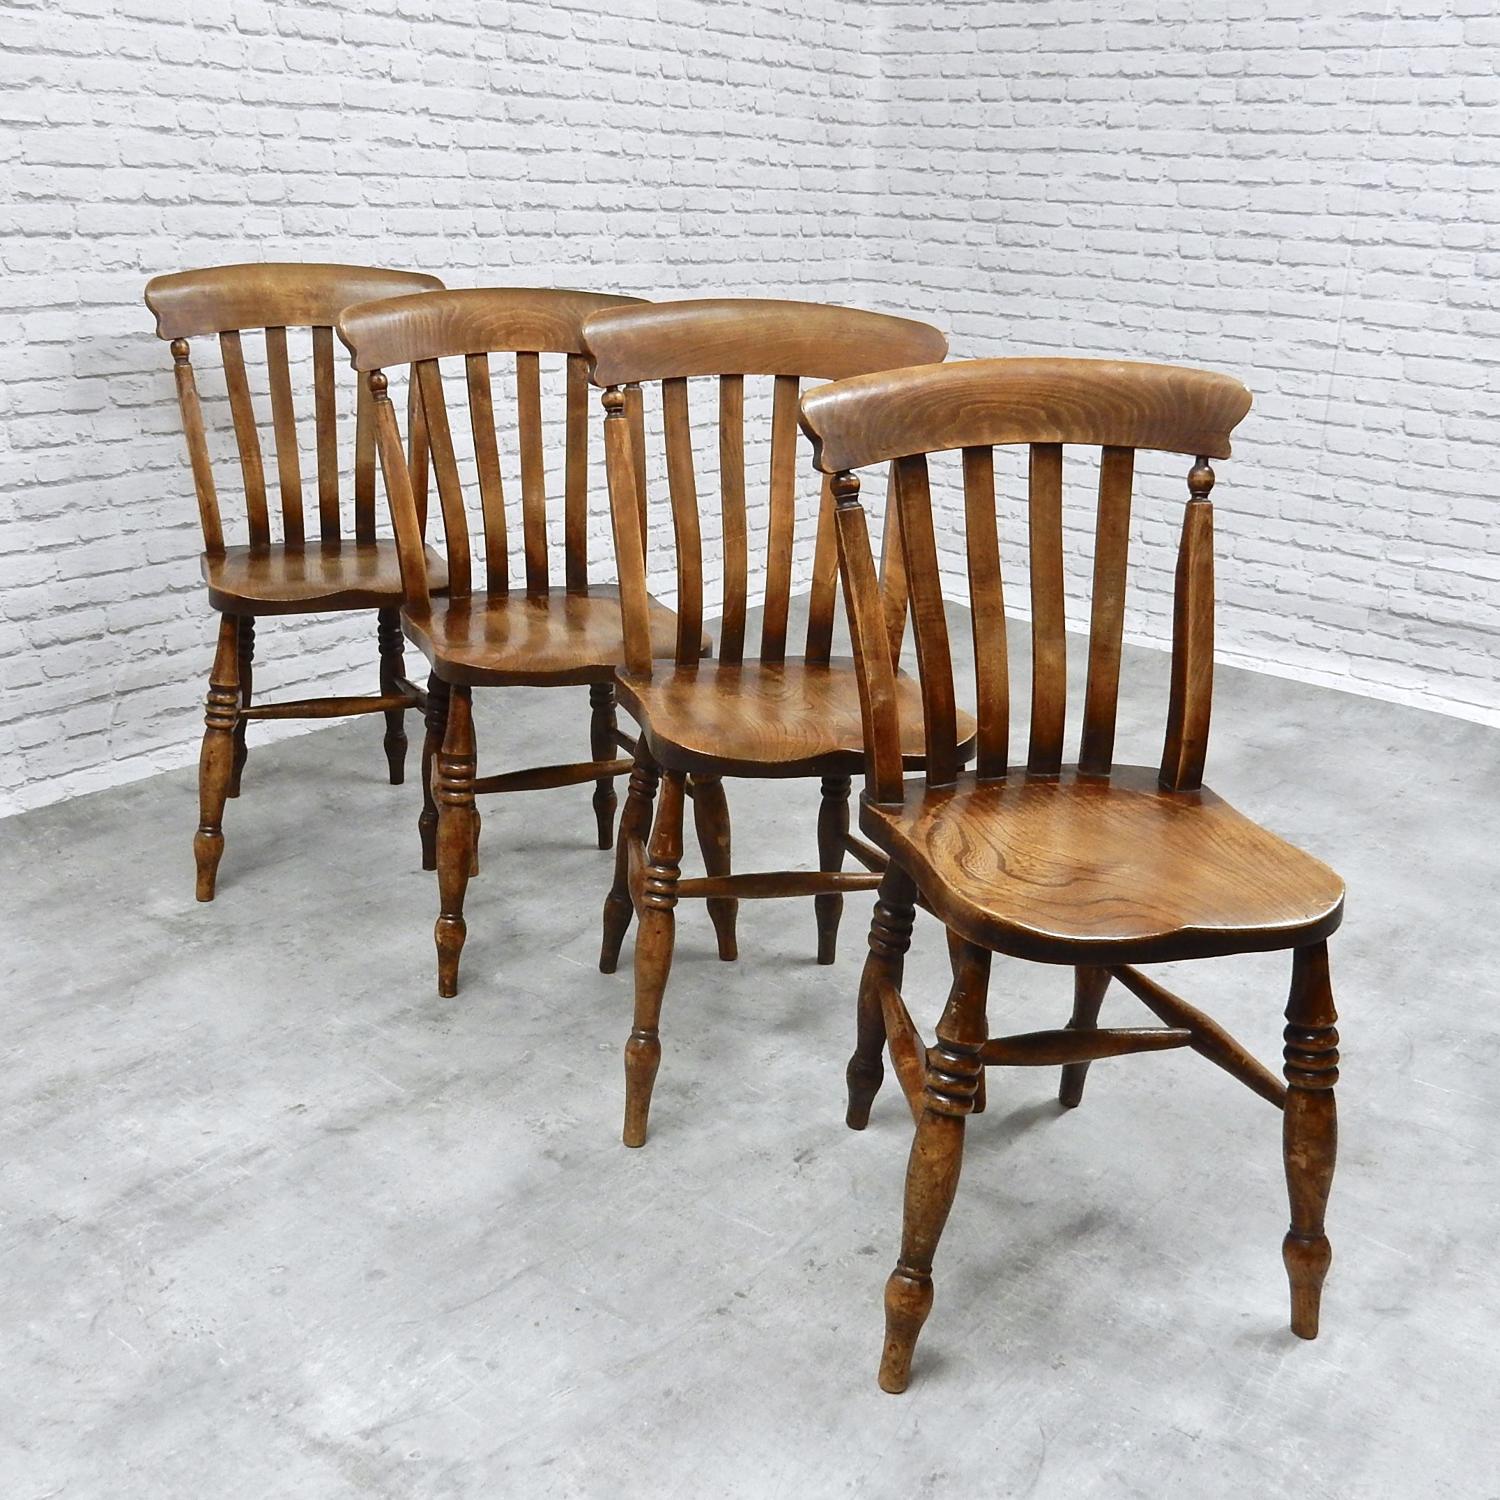 Antique Lathback Windsor Chairs